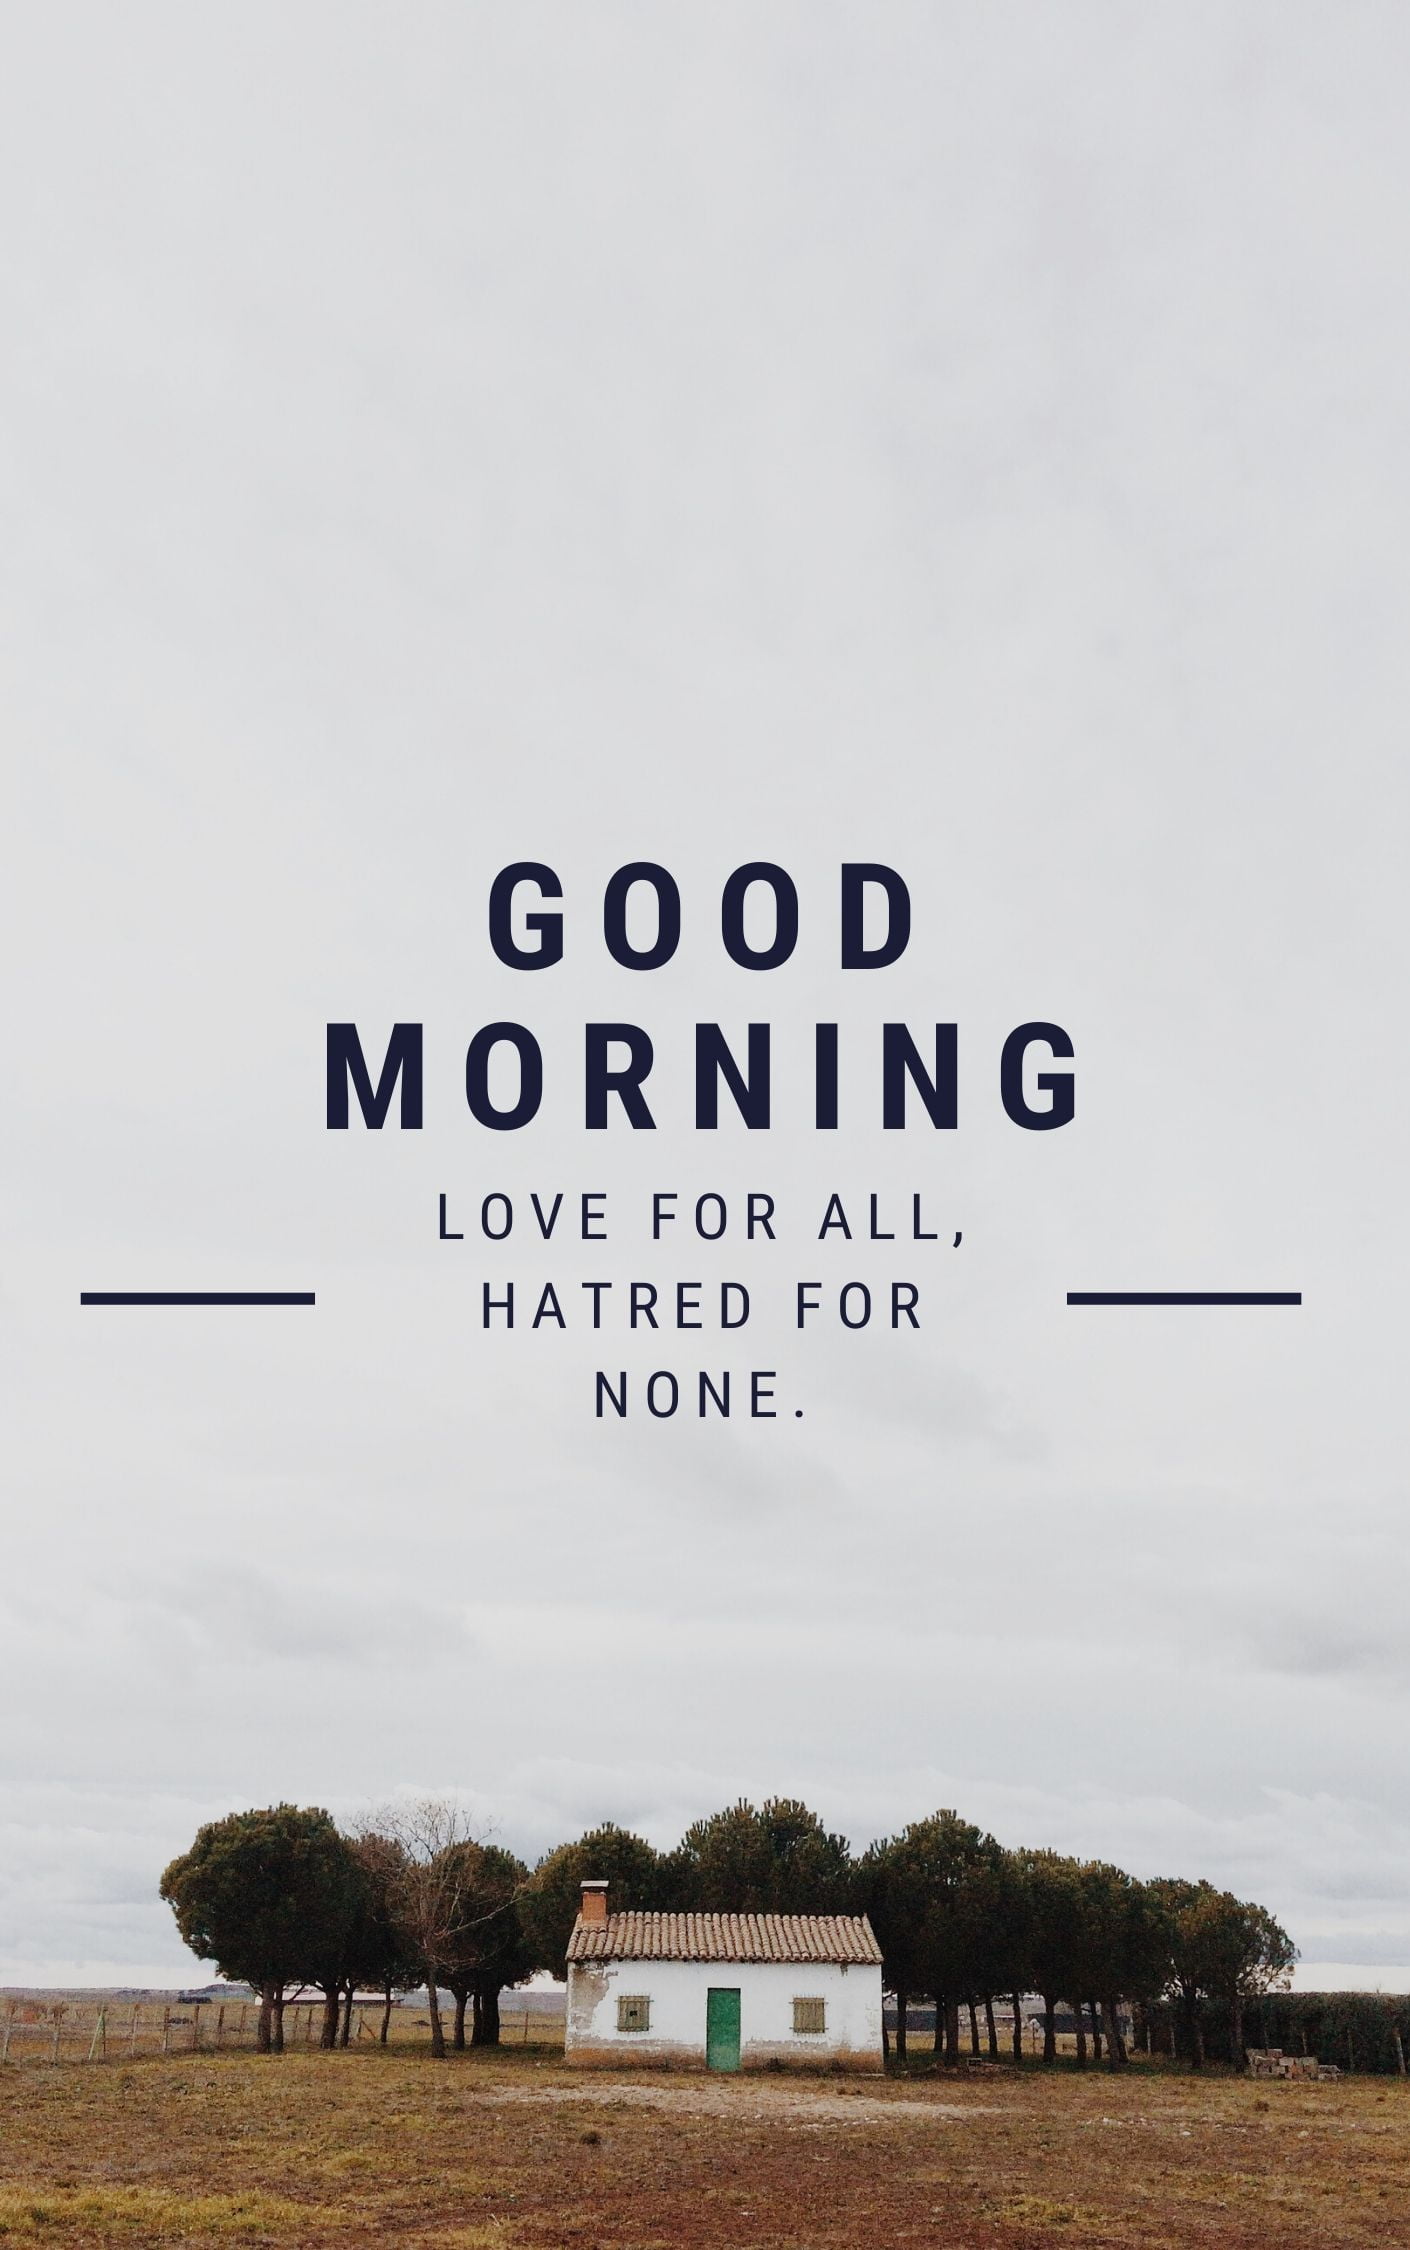 Love for All Hatred for none Good Morning Image full HD free download.